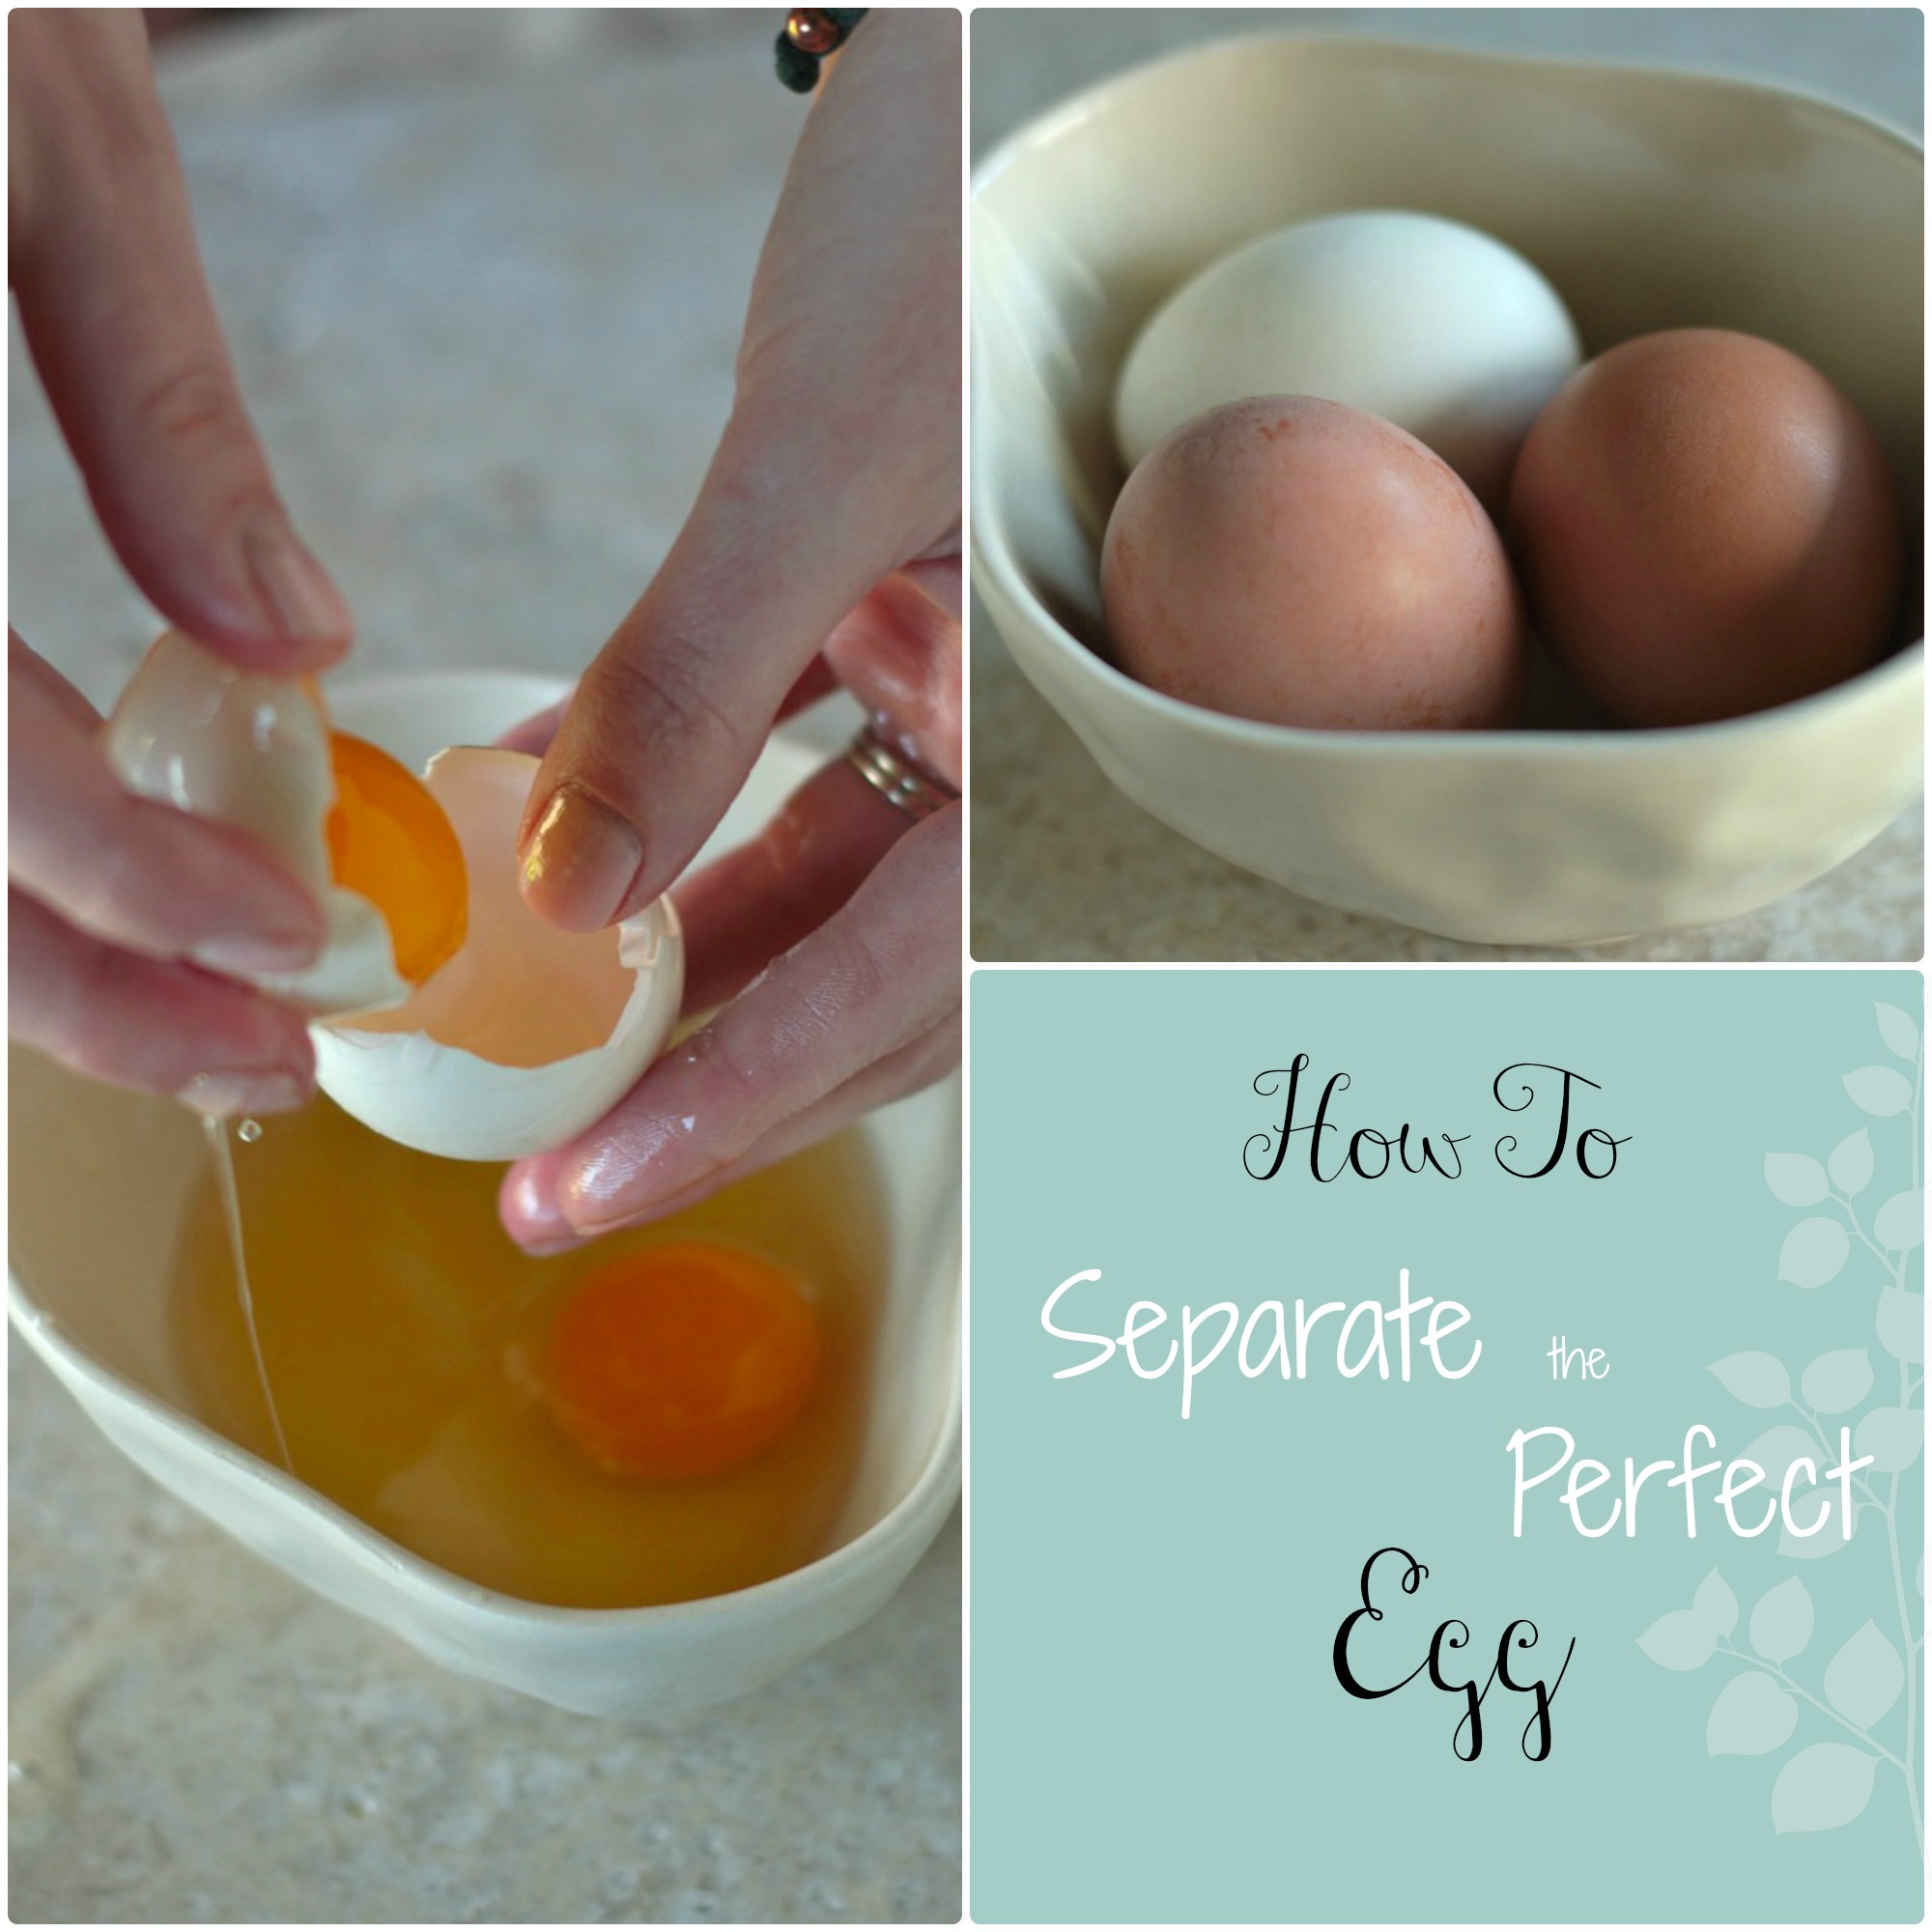 How to Crack and Separate the Perfect Egg - www.countrycleaver.com